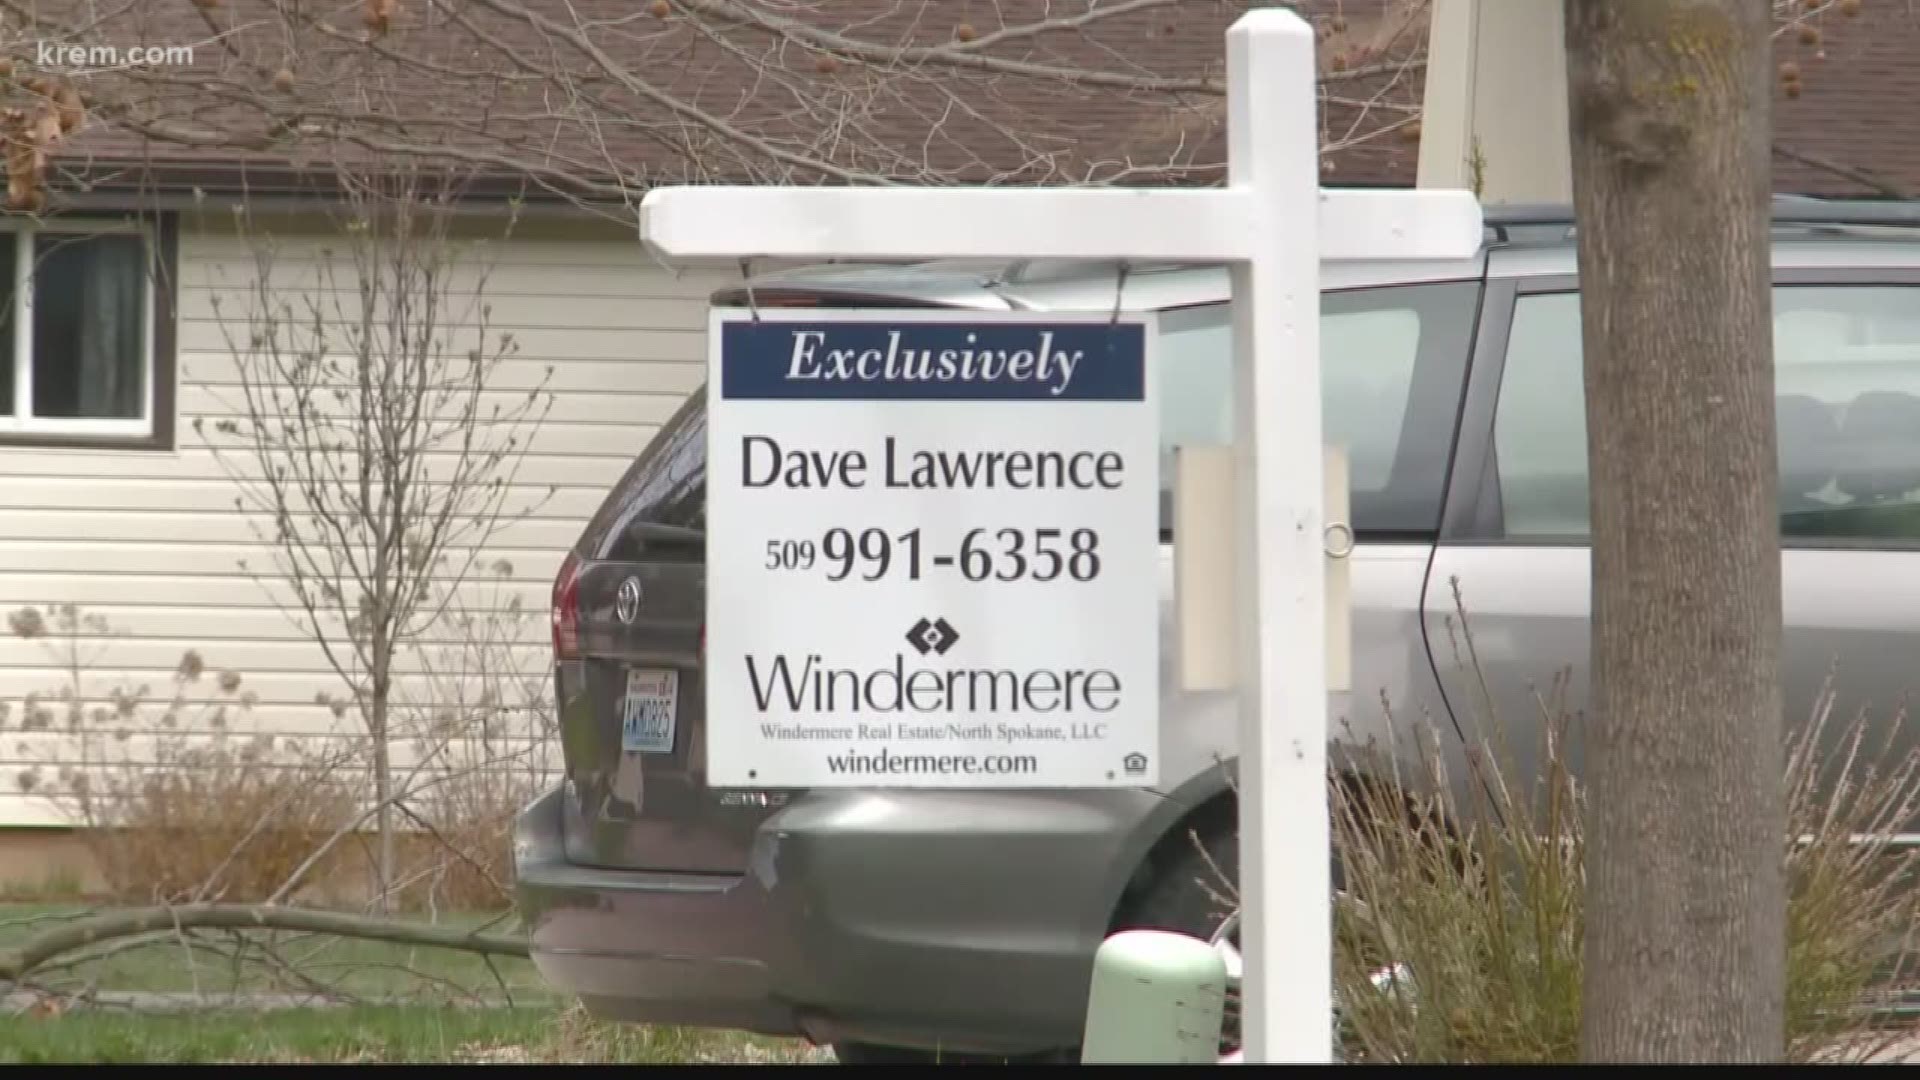 A Spokane real estate agent said the area’s housing market has seen a 50% decrease in buyers and sellers in the market.